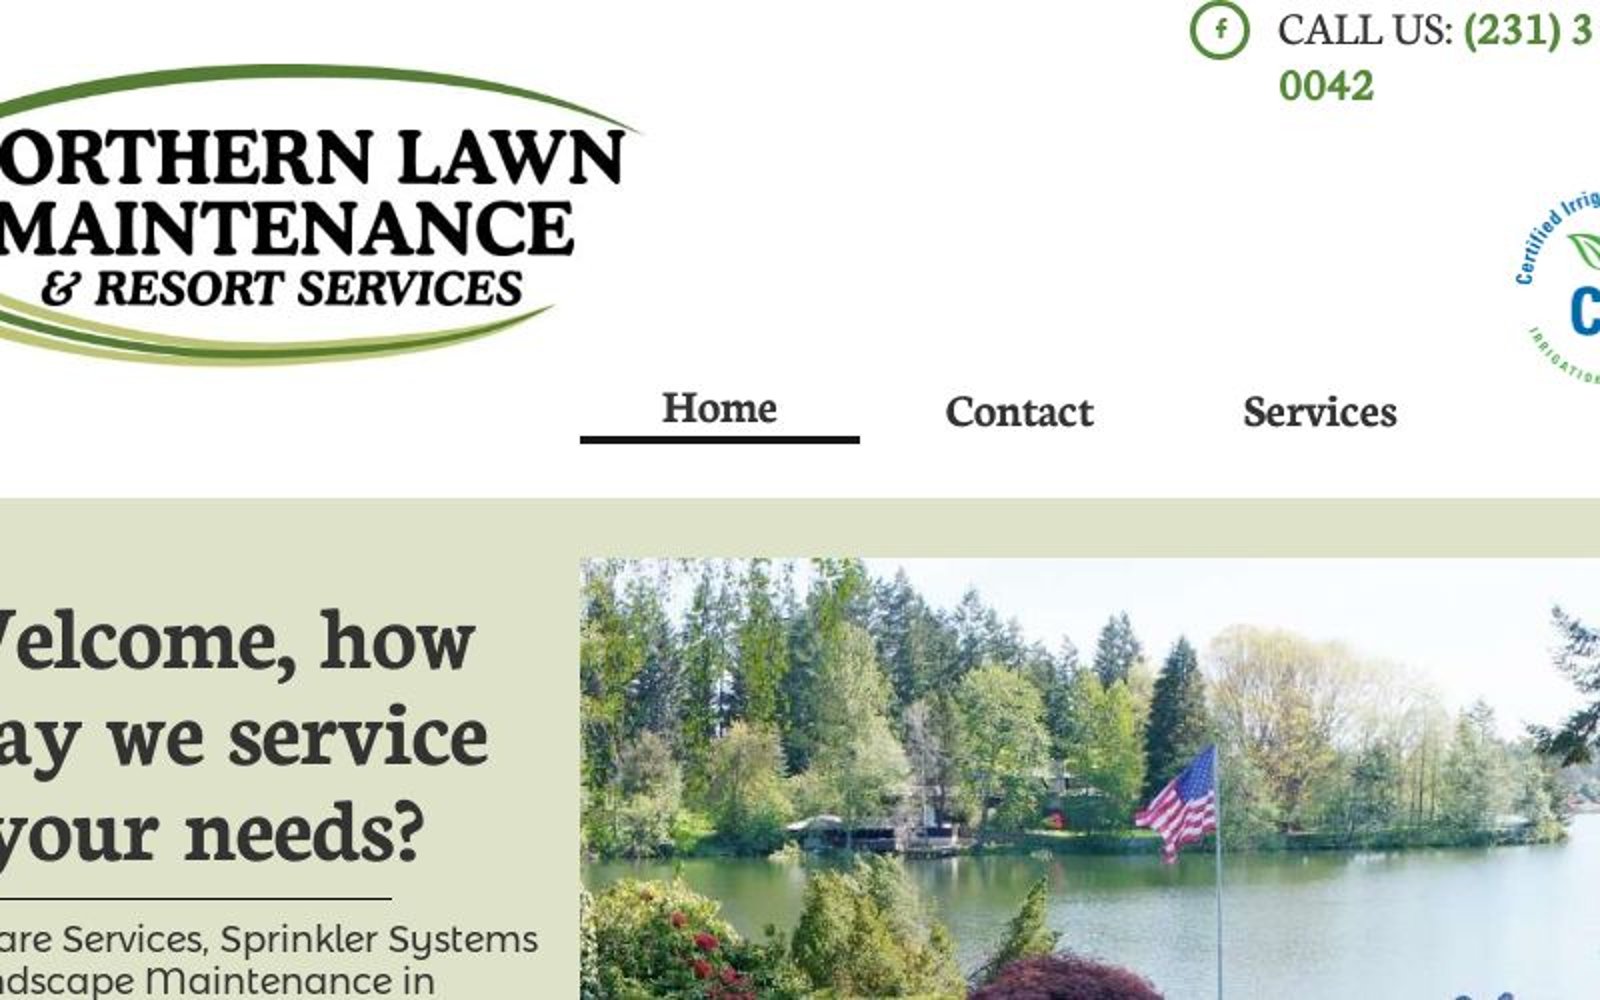 Legendary Lawn Care Maintenance, Commercial & Residential